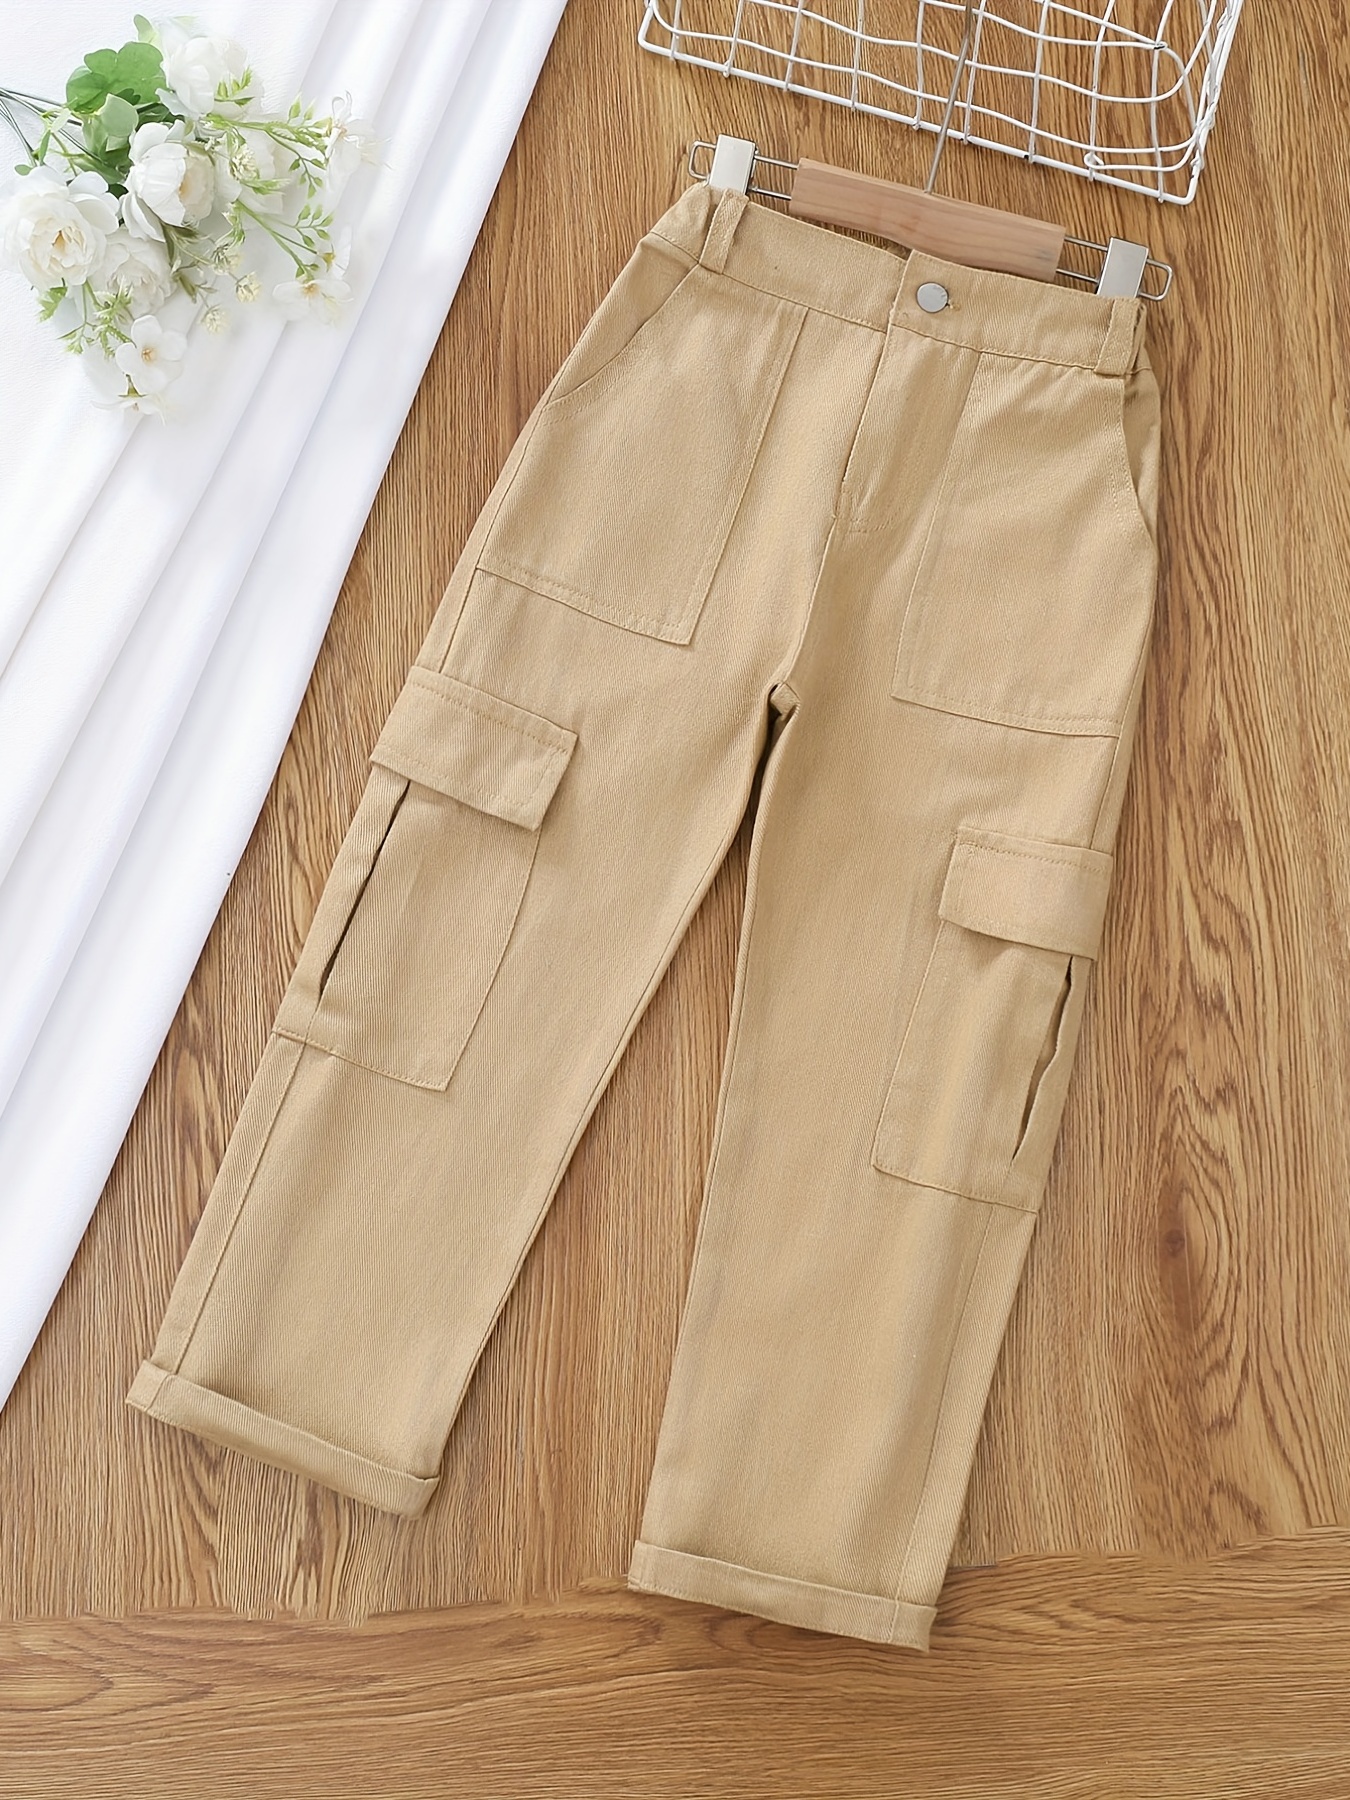 Fashion Girls Cargo Pants Kids Clothes Girls 8 To 12 Spring Children Loose  Trousers Cotton Solid Color Pocket Pants 3 12Yrs 210225 From Jiao03, $39.33